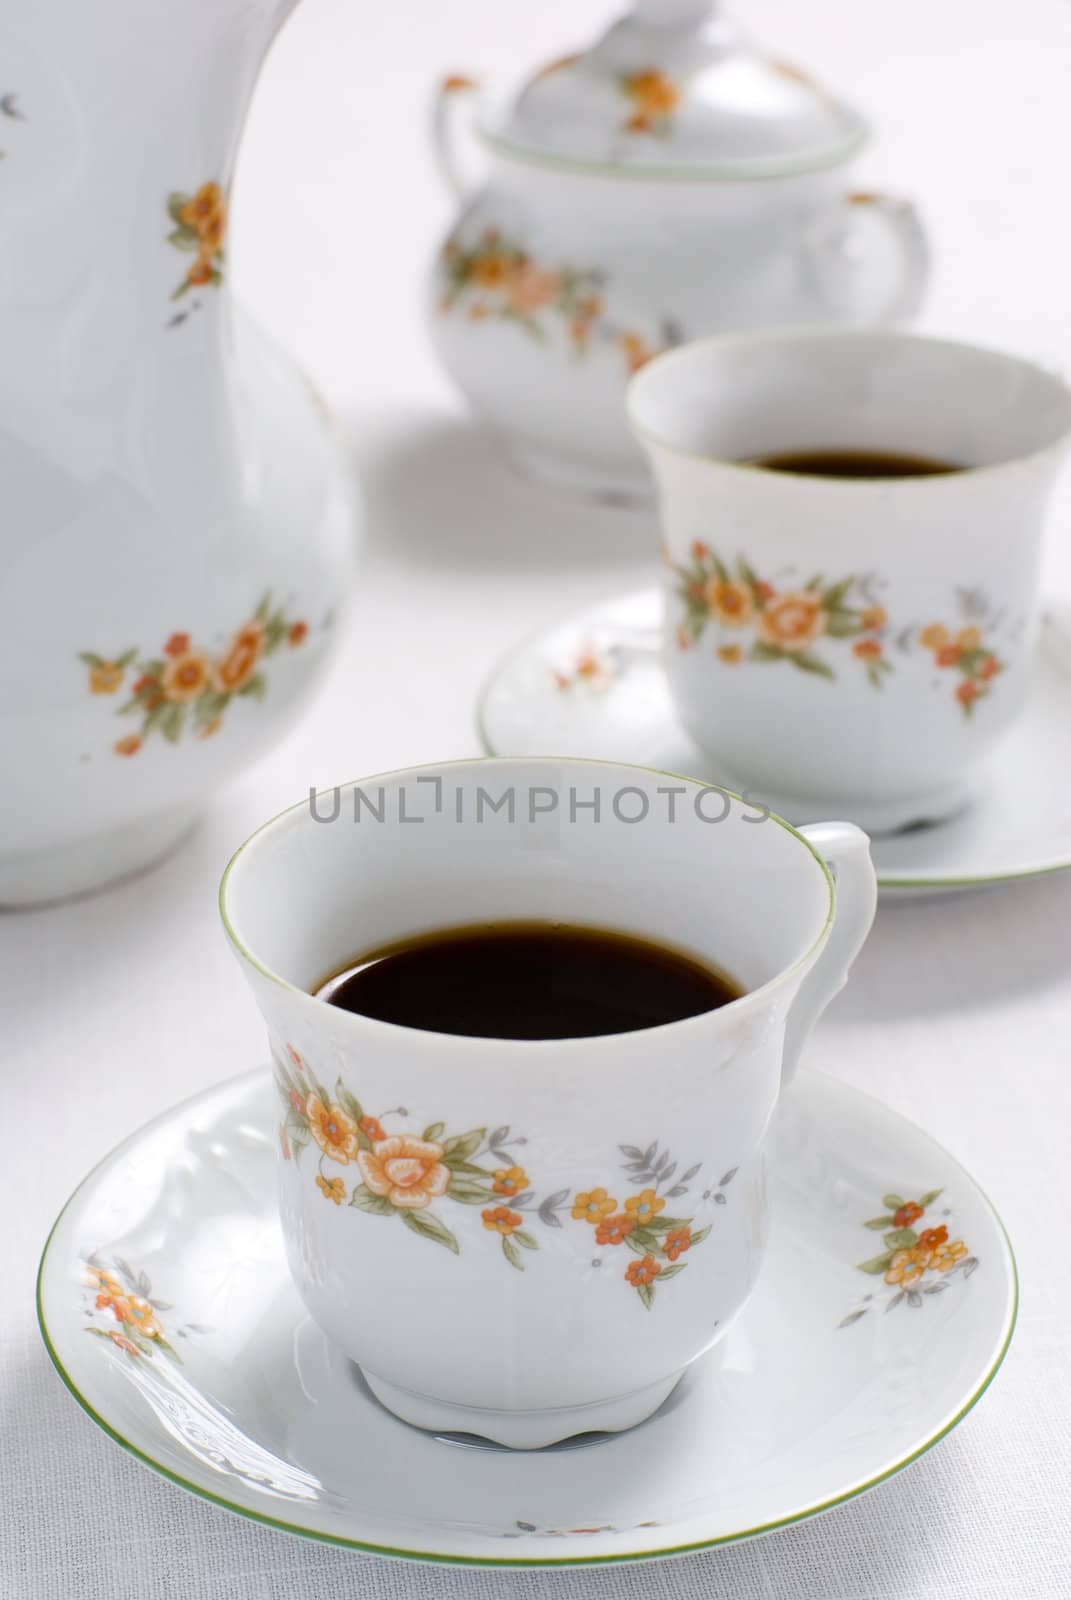 Coffee (or tea) set on the table - cup of coffee on the front (focus on it) sugar basin behind. Shallow depth of field.